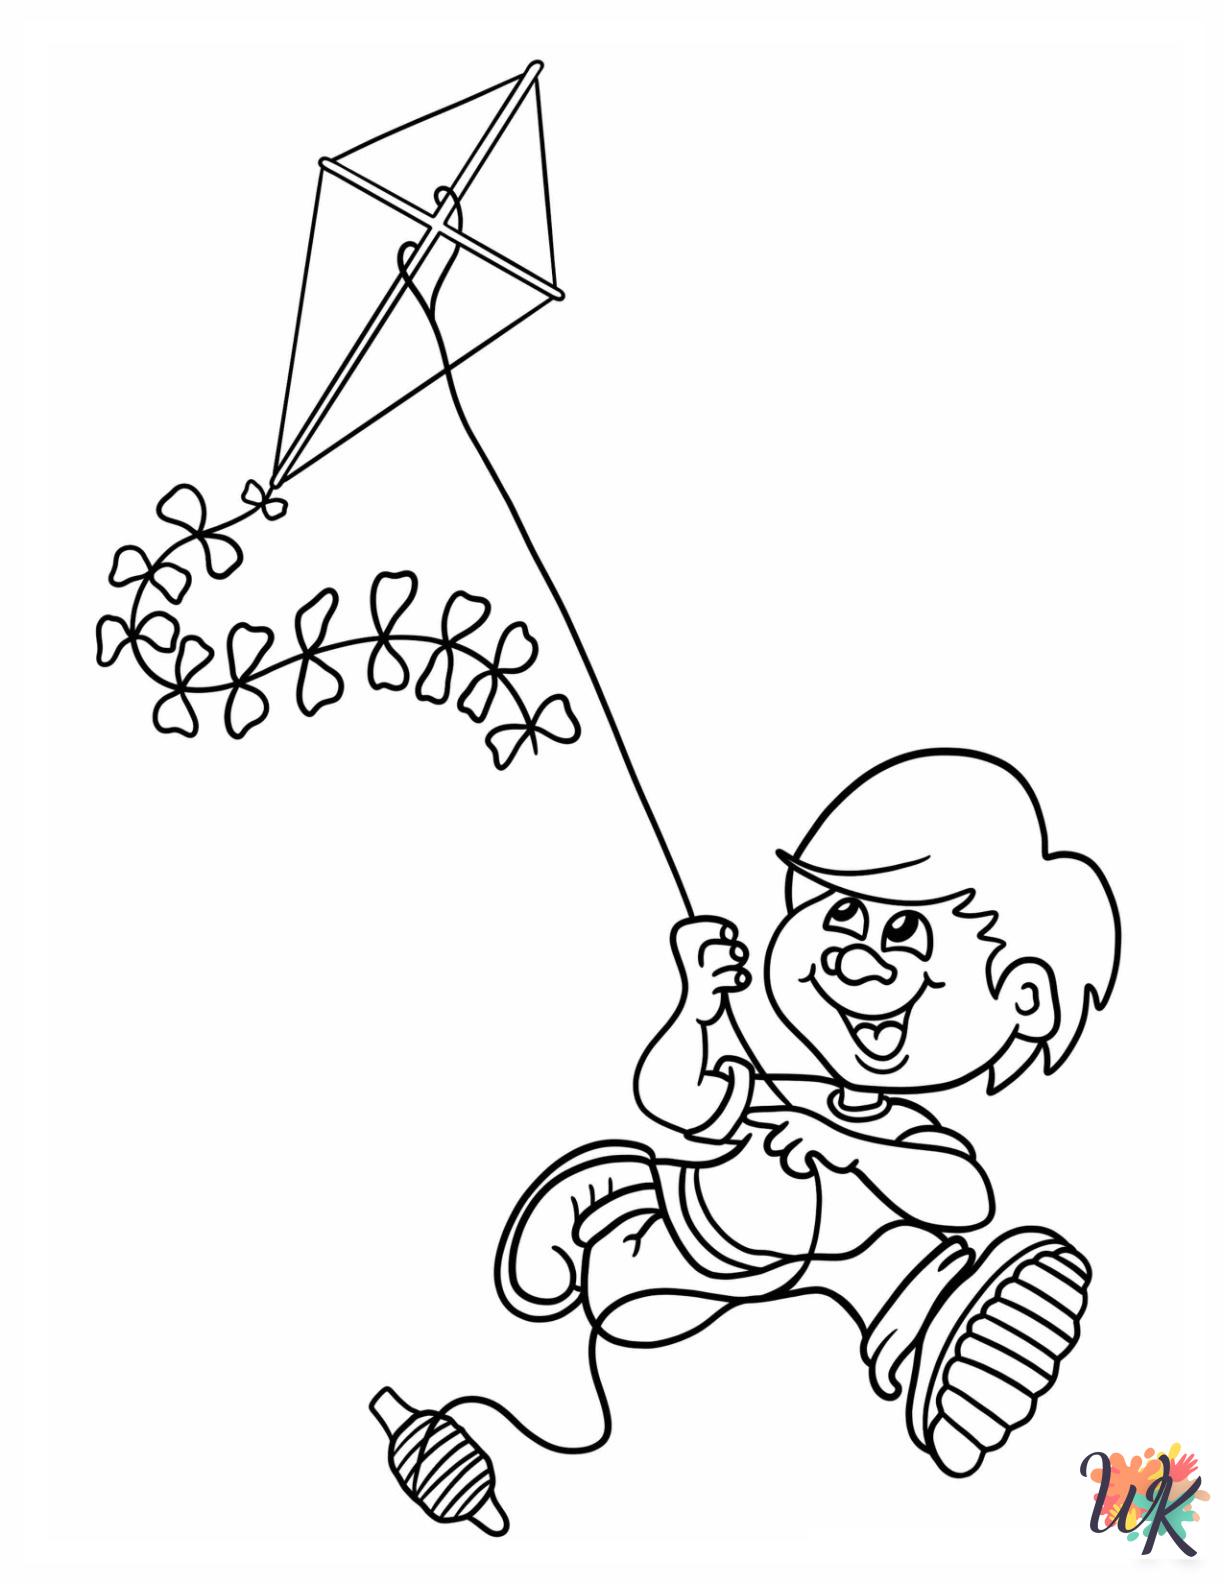 Kite coloring pages for adults